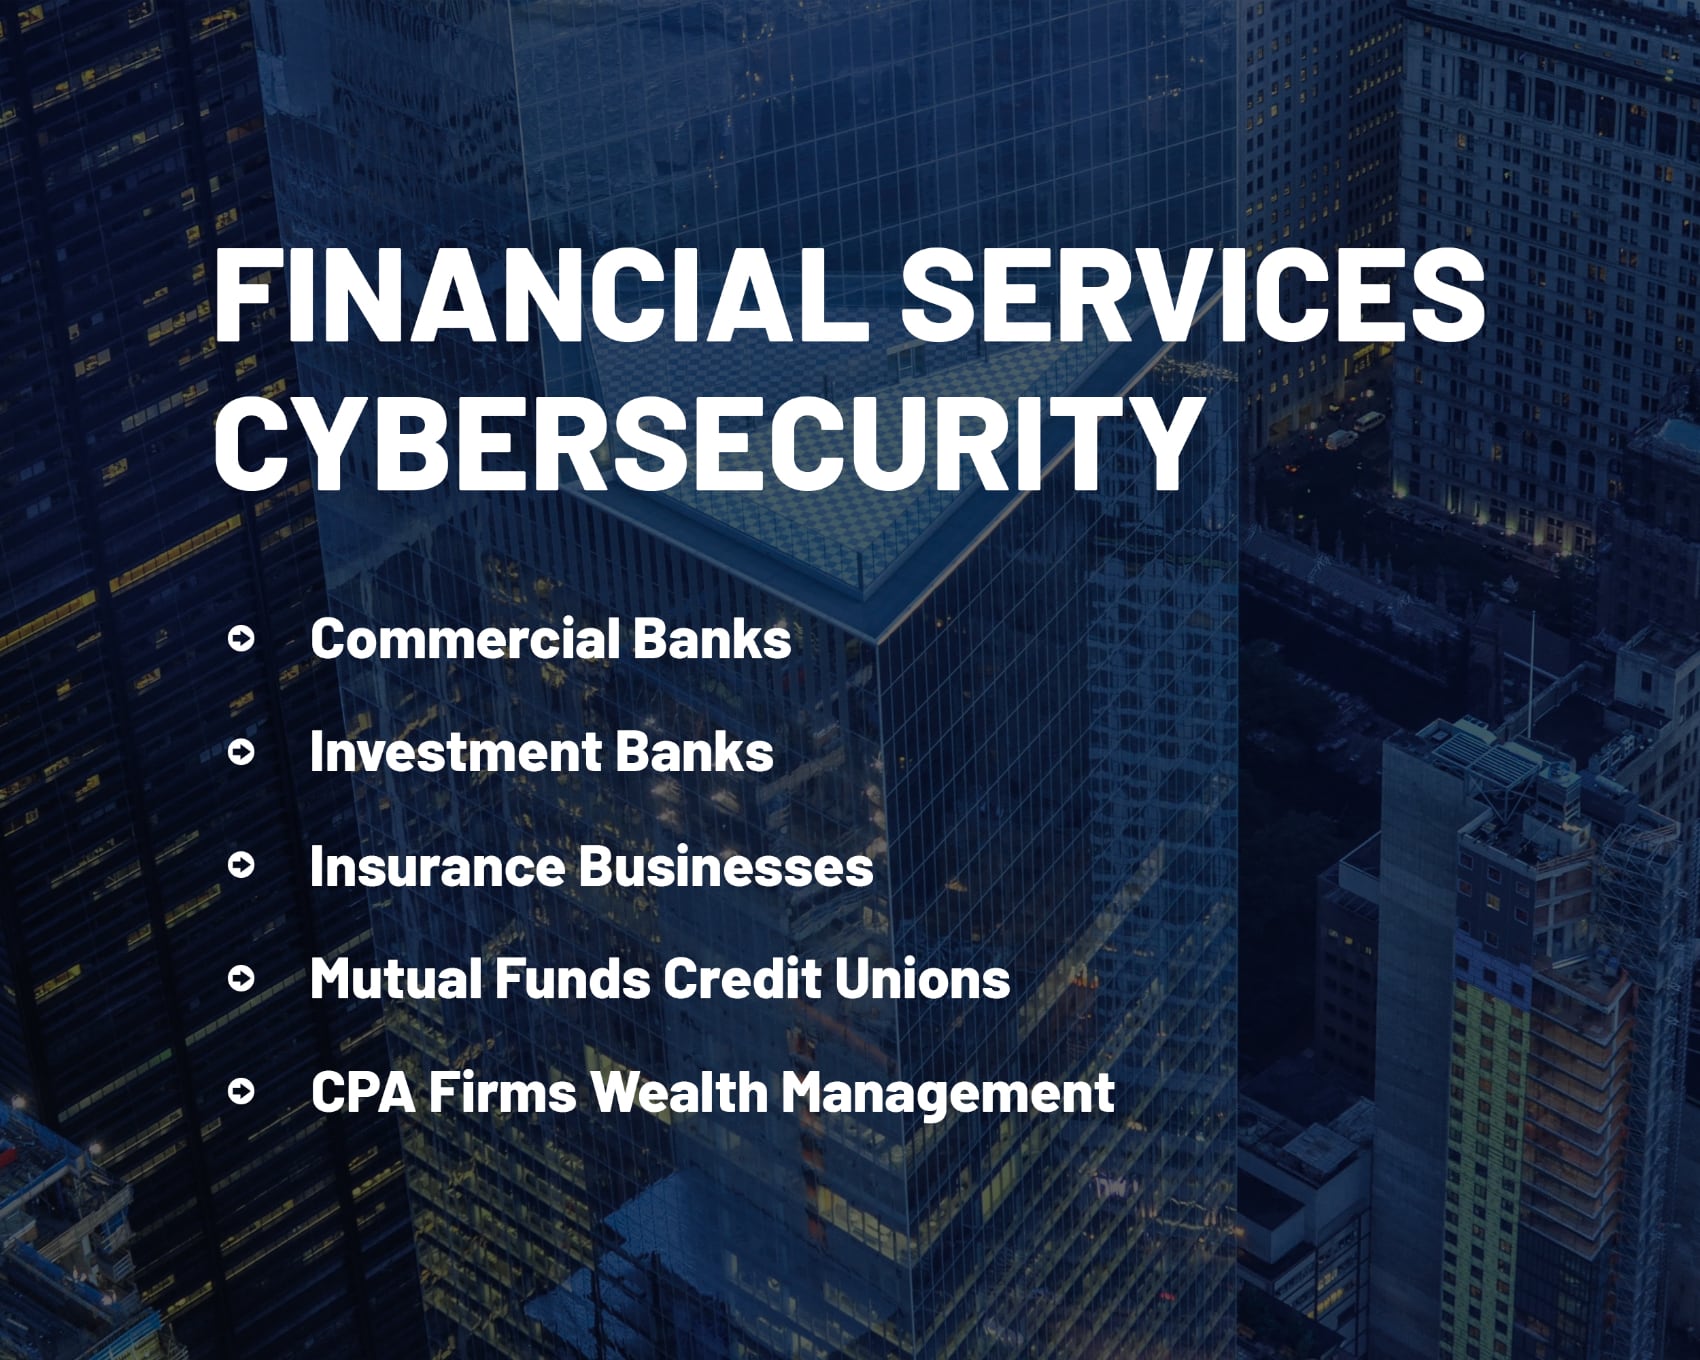 Financial Services Cybersecurity Risk Management